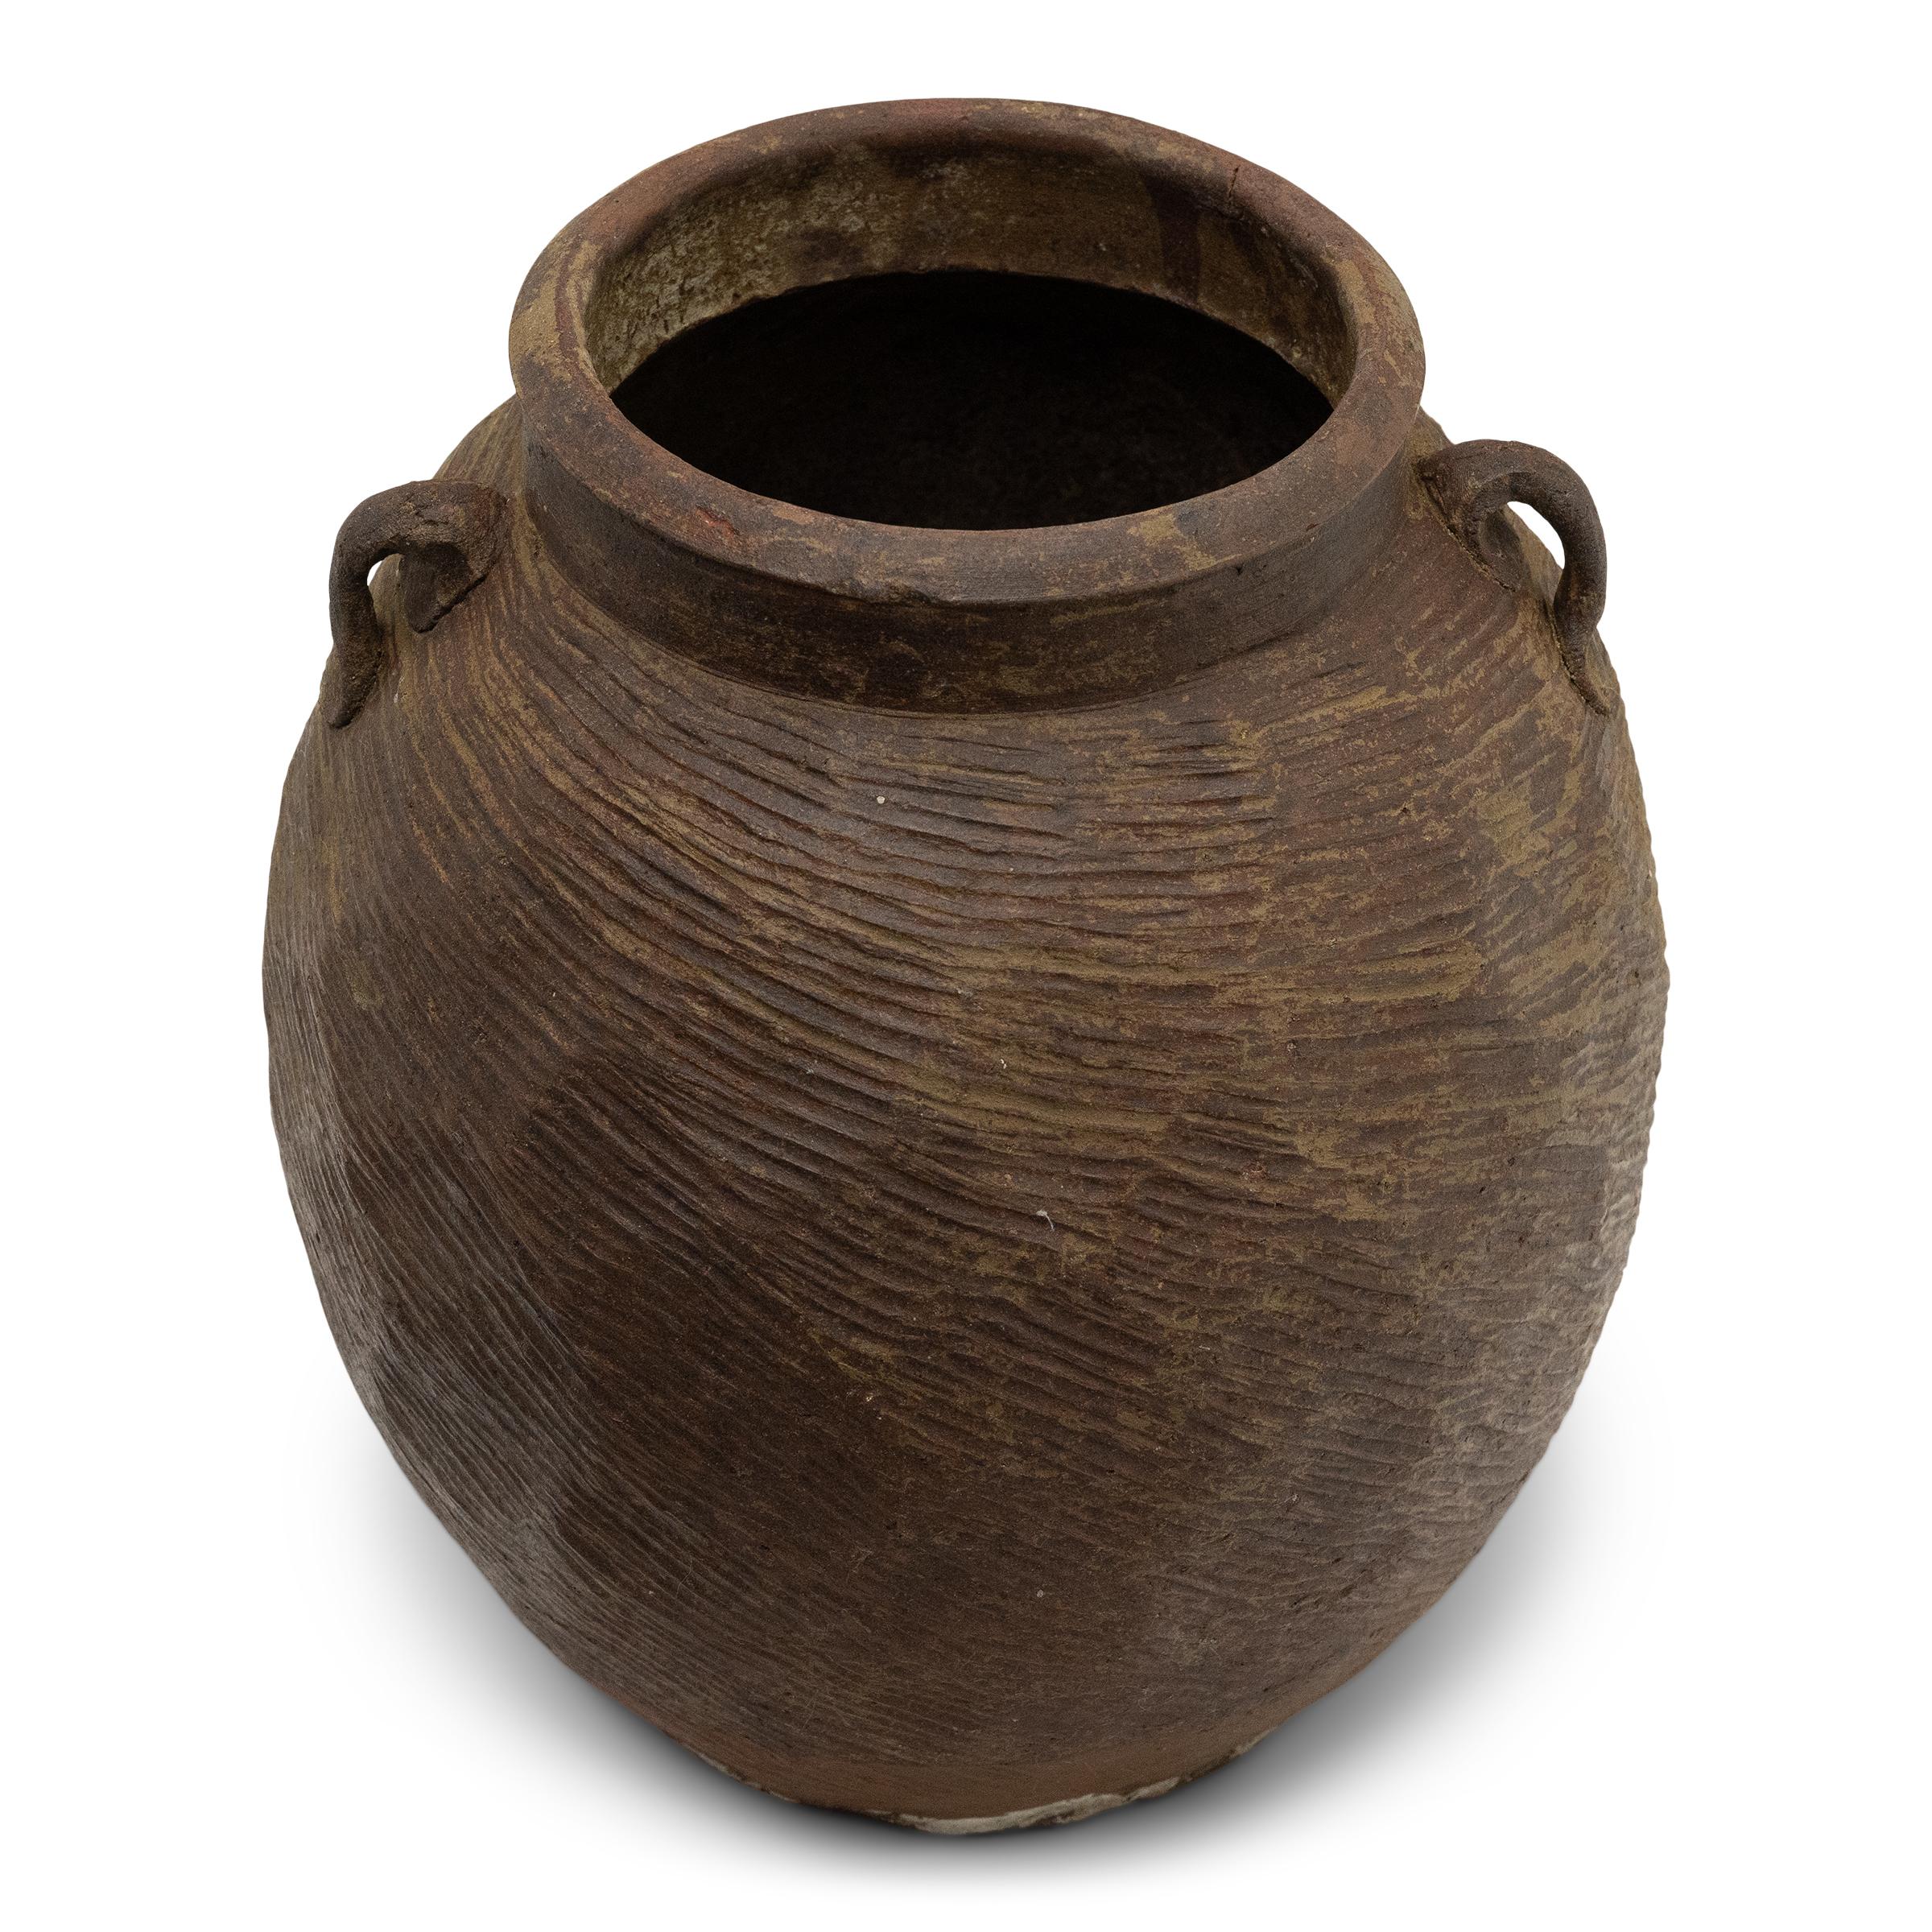 Qing Chinese Yunnan Lobed Pot, c. 1800 For Sale